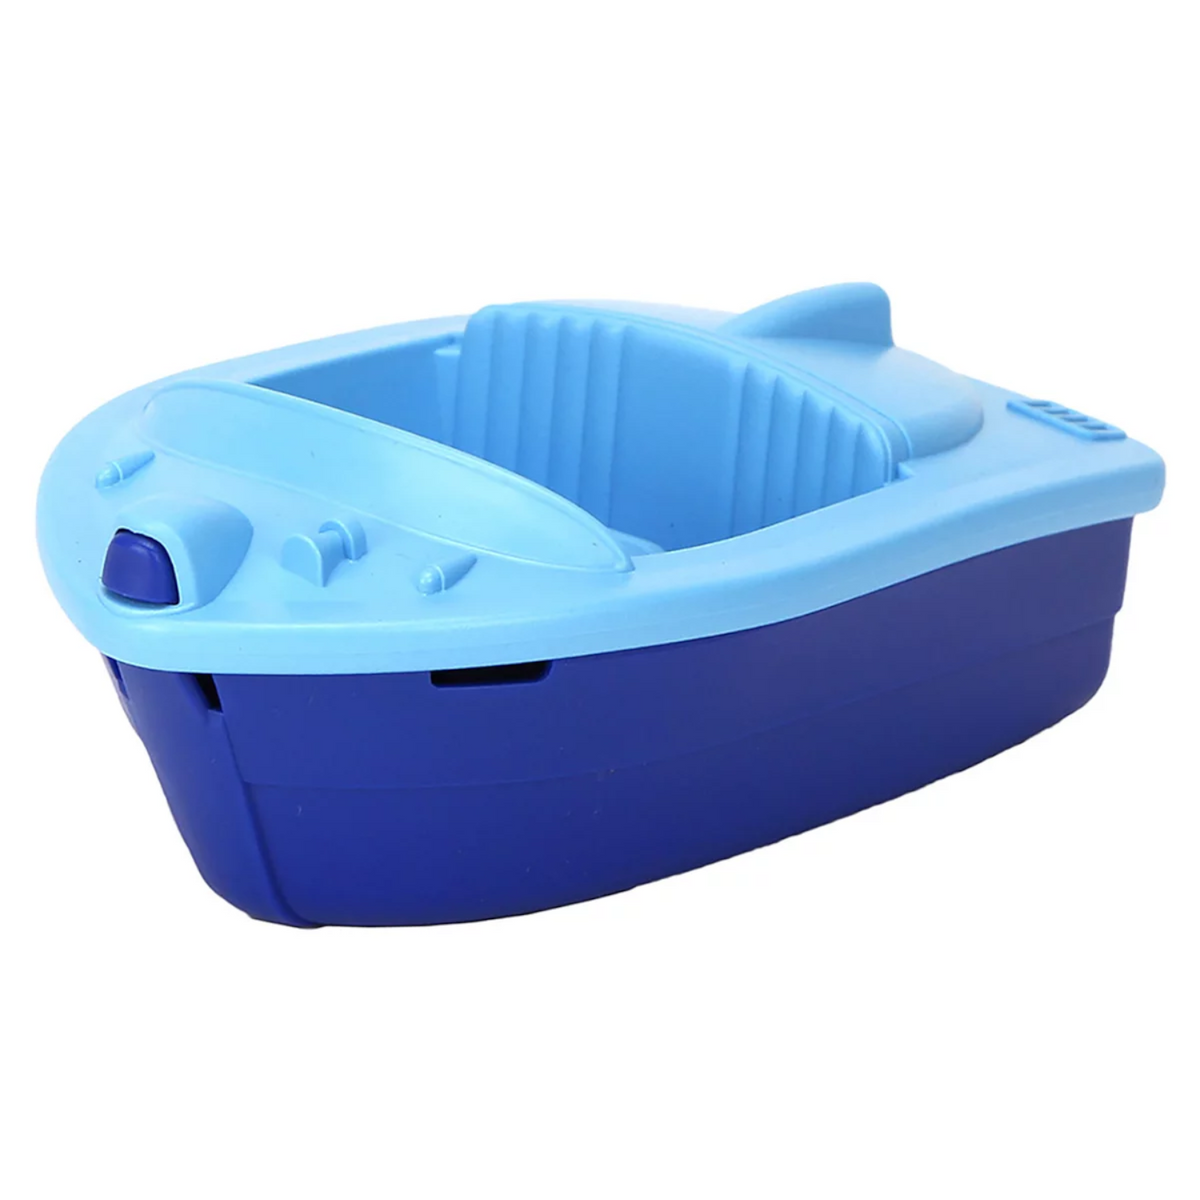 Green Toys Sport Boat Asst. - Tumbleweed Toys